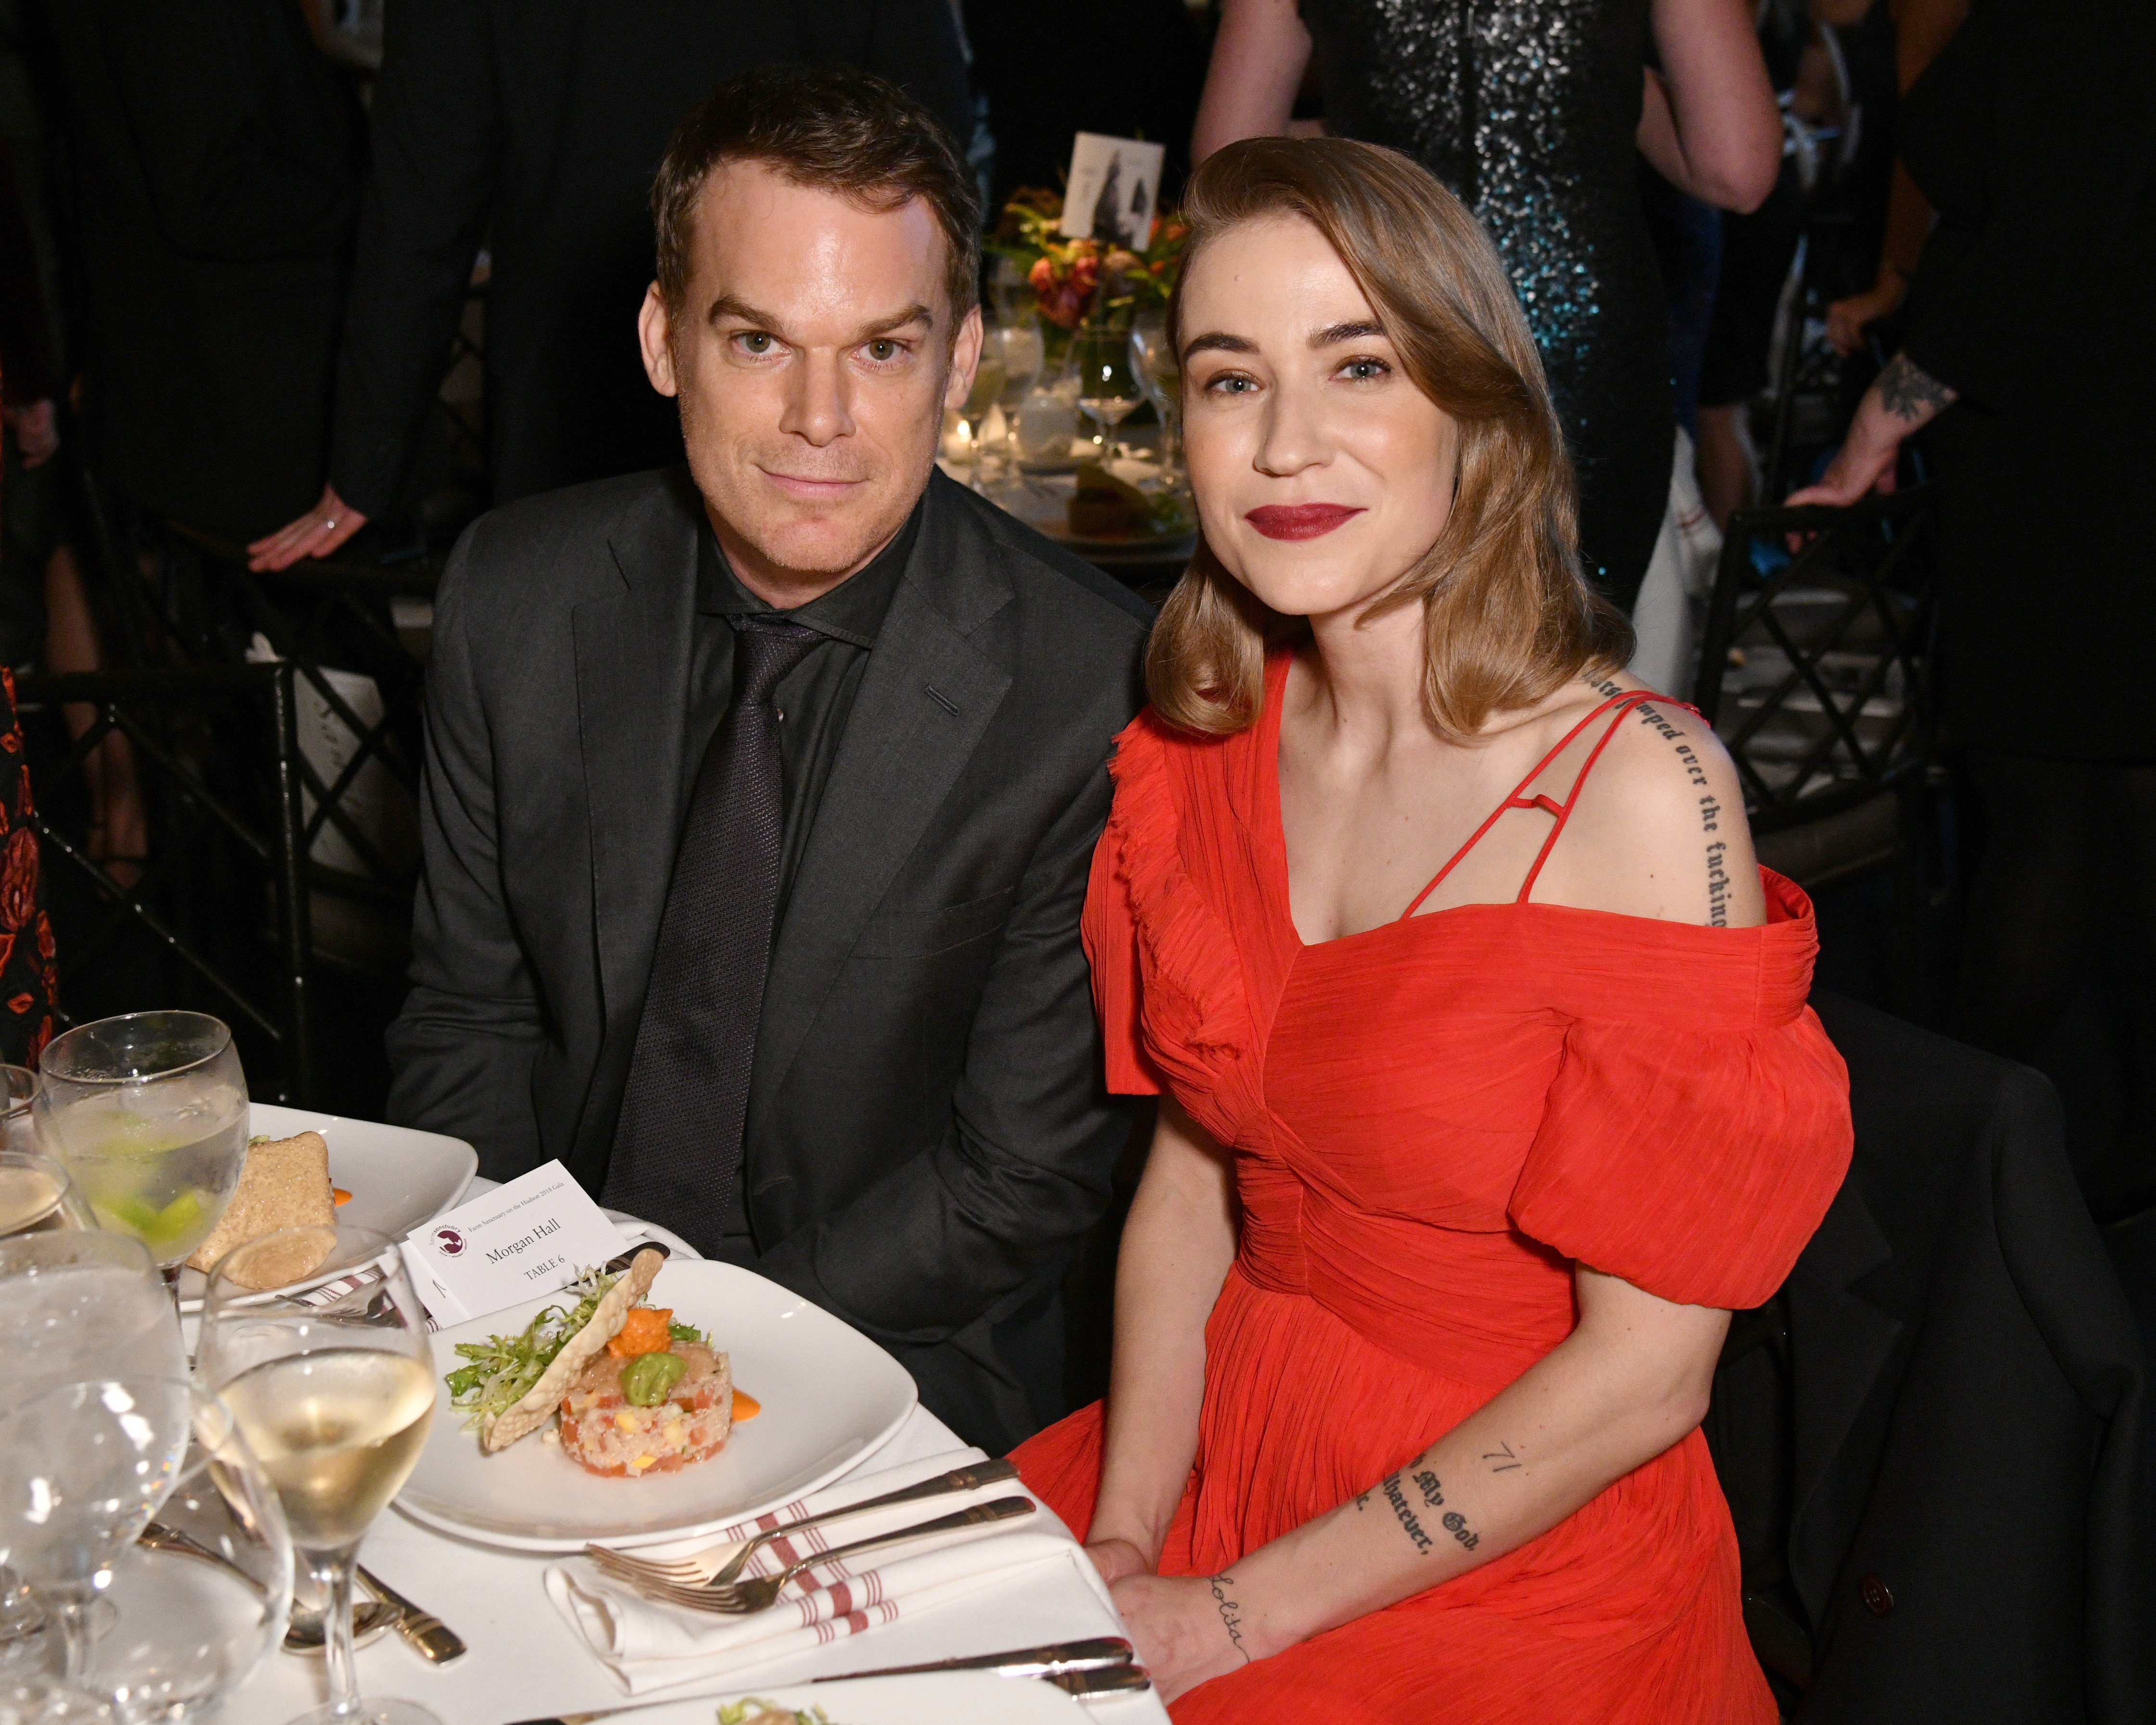 Michael C. Hall (L) and critic Morgan Macgregor attend the 2018 Farm Sanctuary on the Hudson gala at Pier 60 on October 4, 2018, in New York City. | Source: Getty Images.